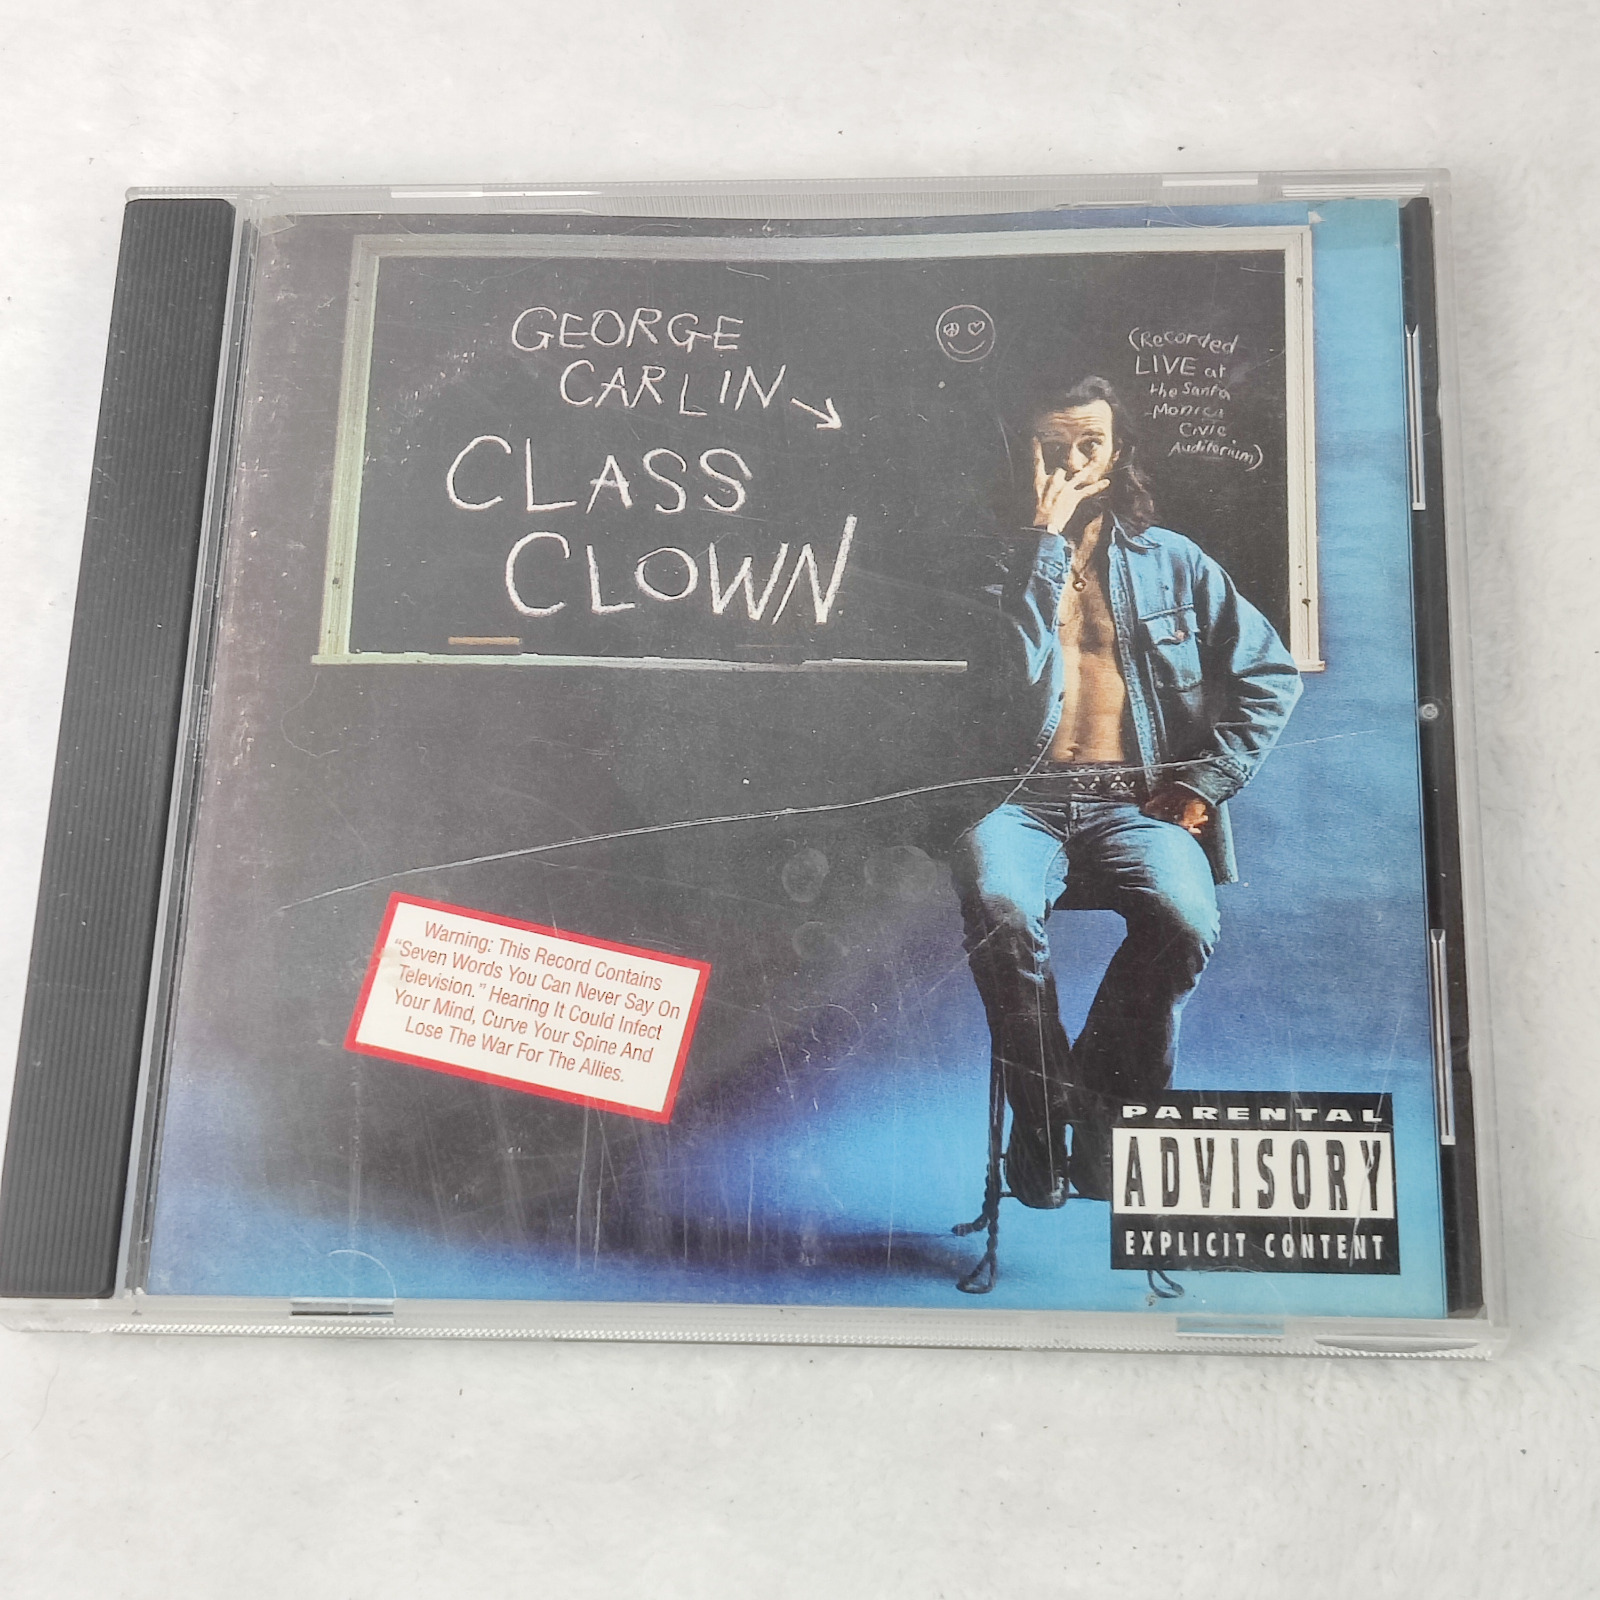 george carlin clown class cd comedy recording 2000 reissued CD